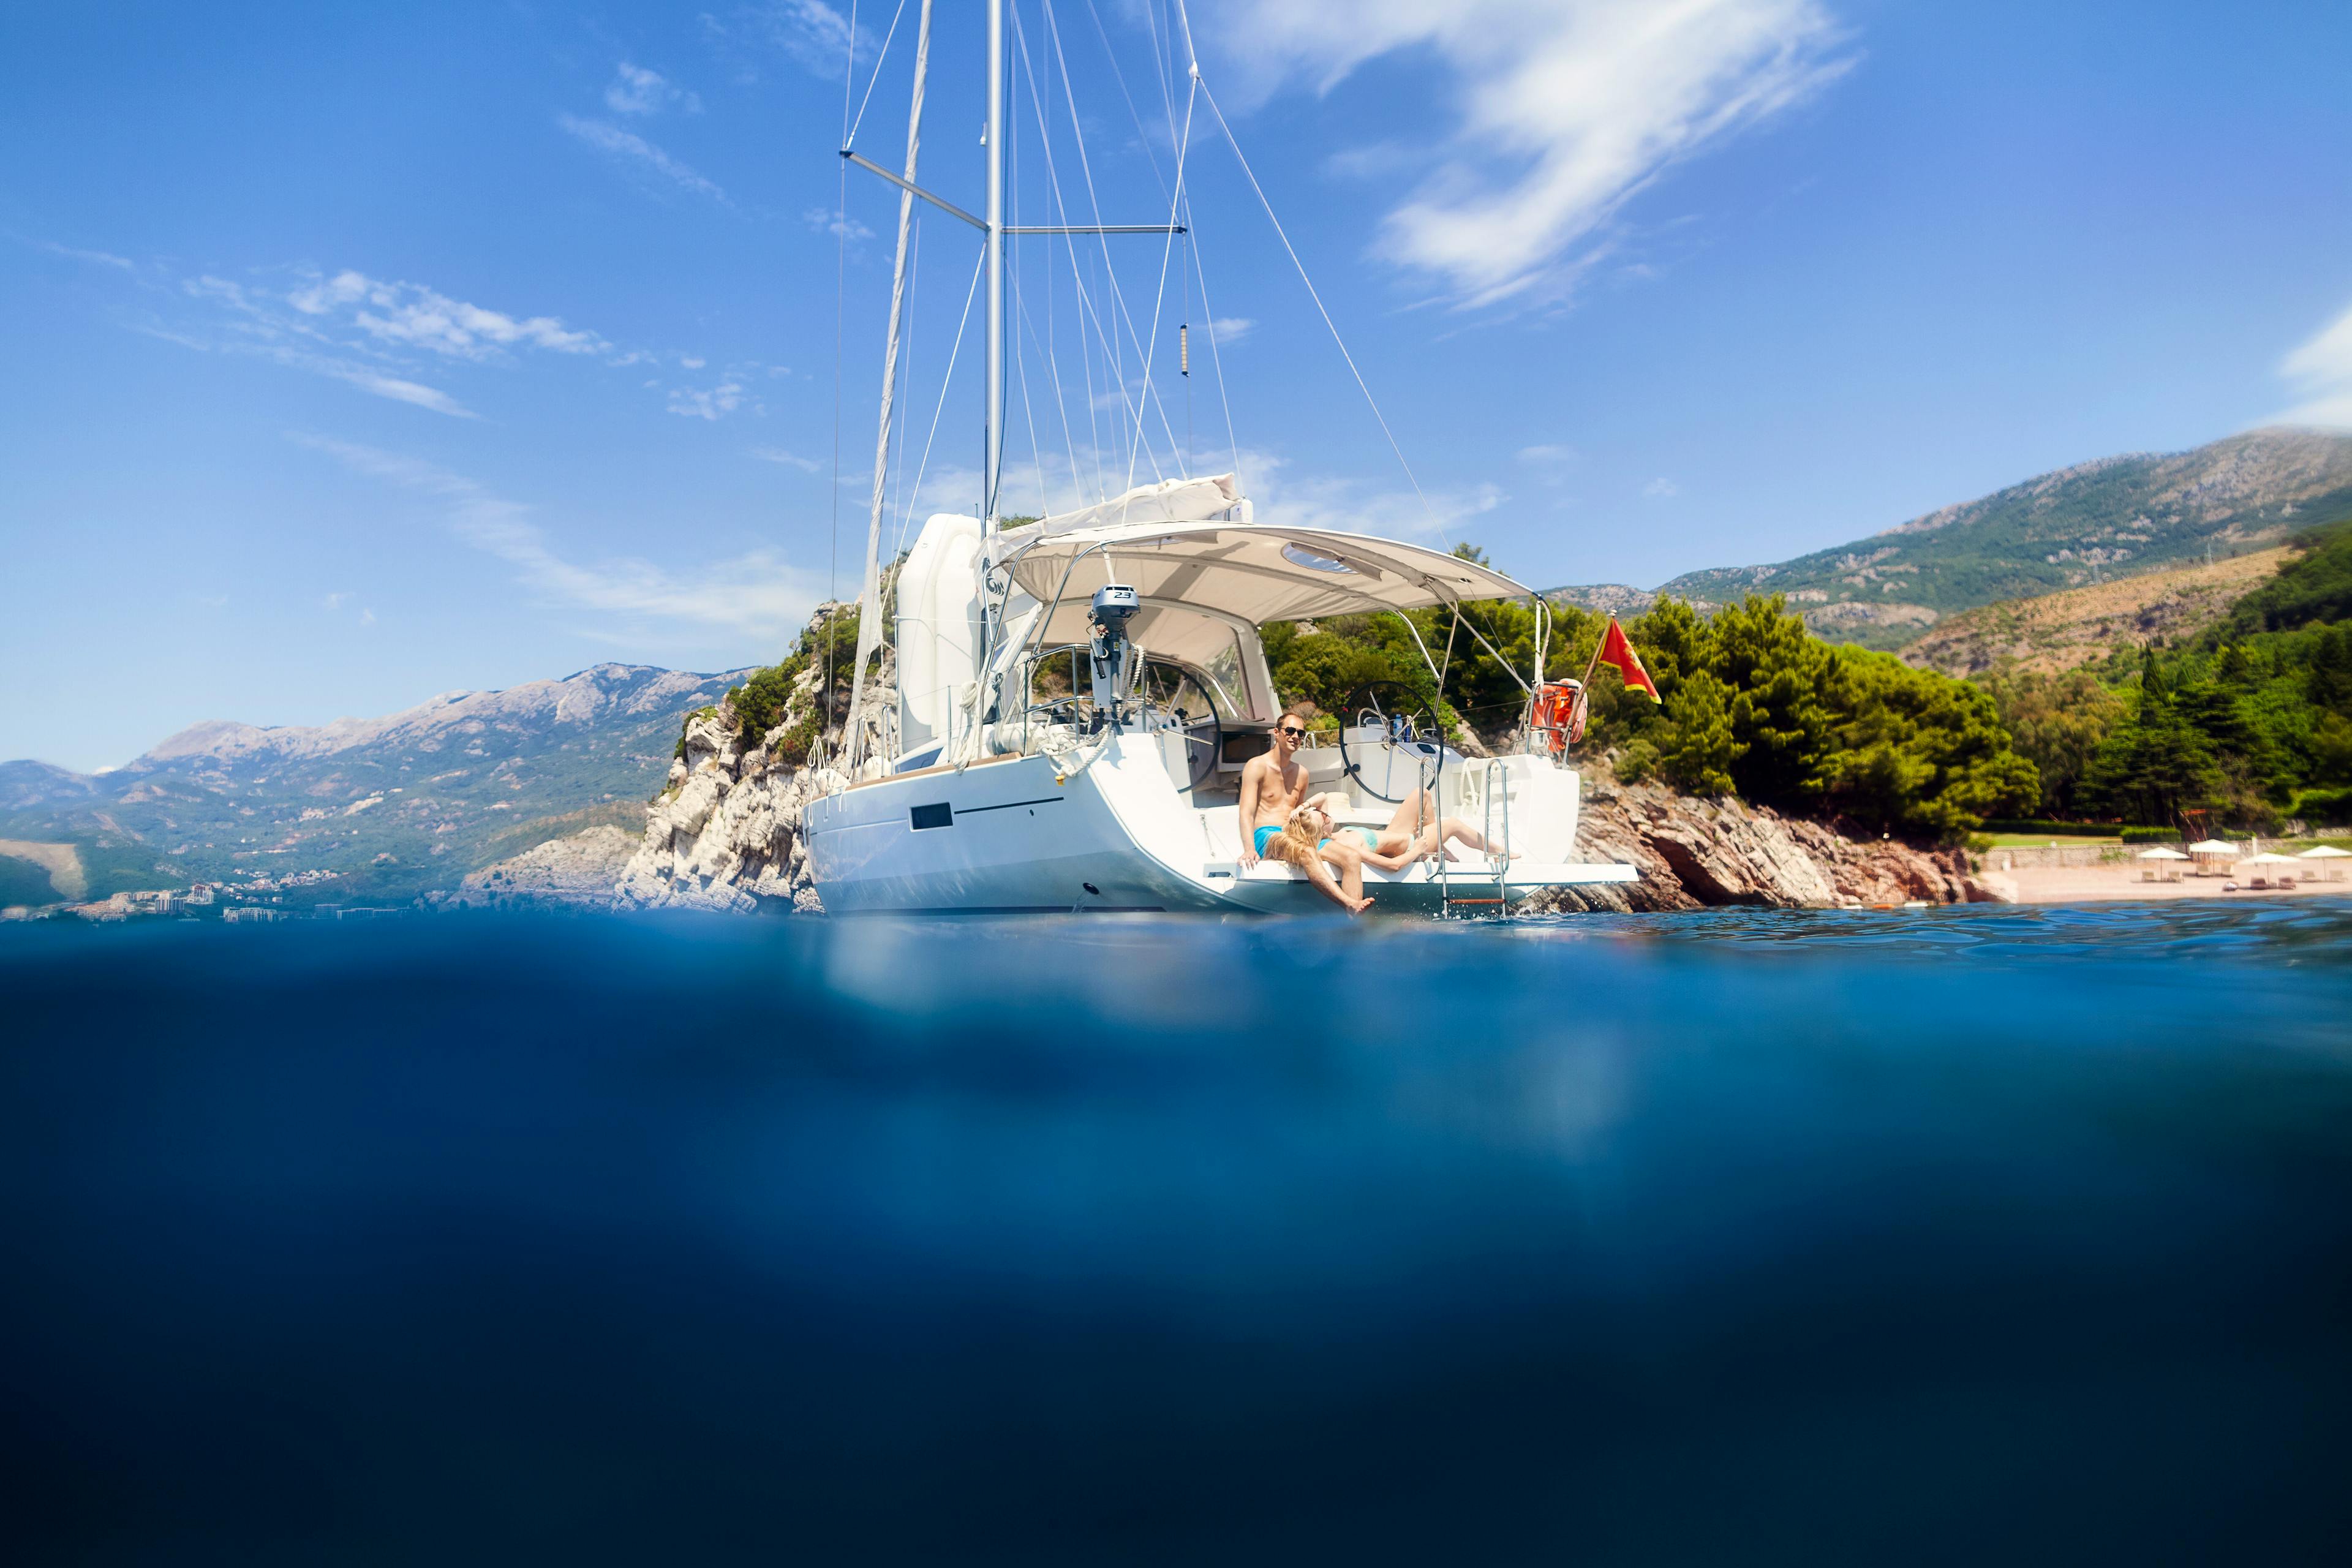 Most romantic destinations for a sailing holiday